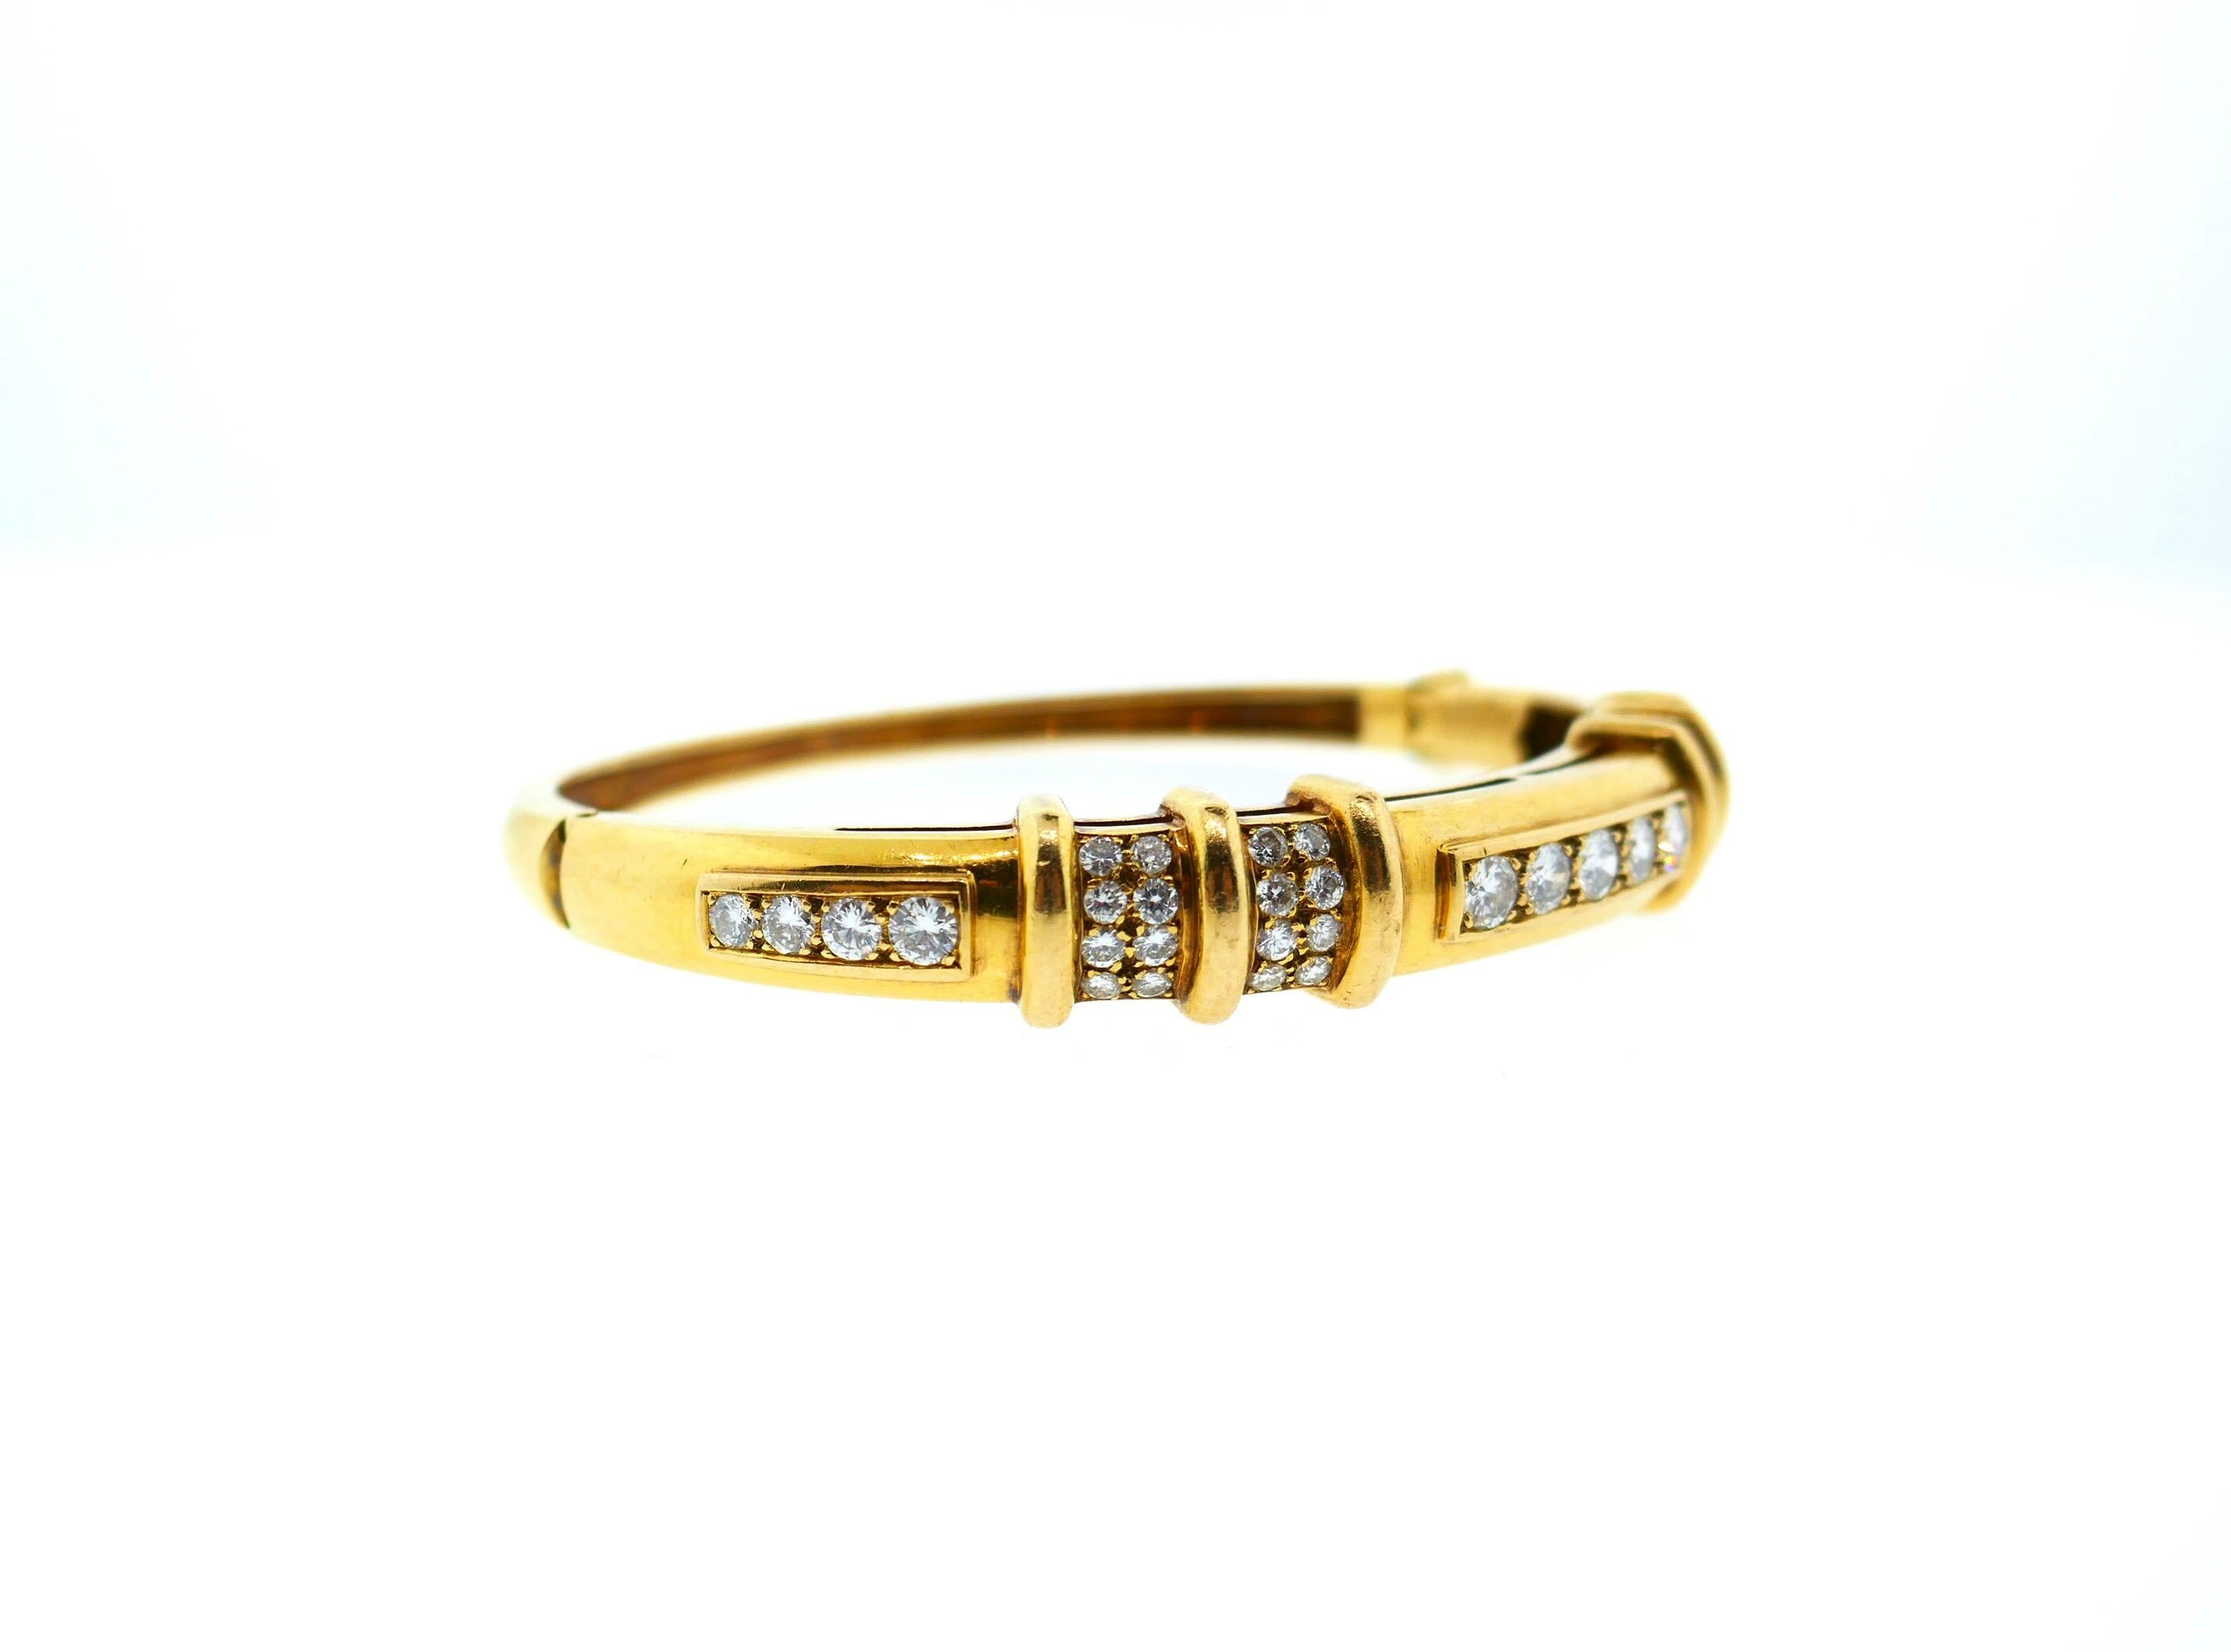 Mauboussin French 18 Karat Yellow Gold Diamond Bangle

This is a beautiful and versatile Mauboussin yellow gold and diamond bangle. The bangle features over 1.5cts of excellent quality diamonds. 

Dimensions: Will fit a medium wrist (6.75